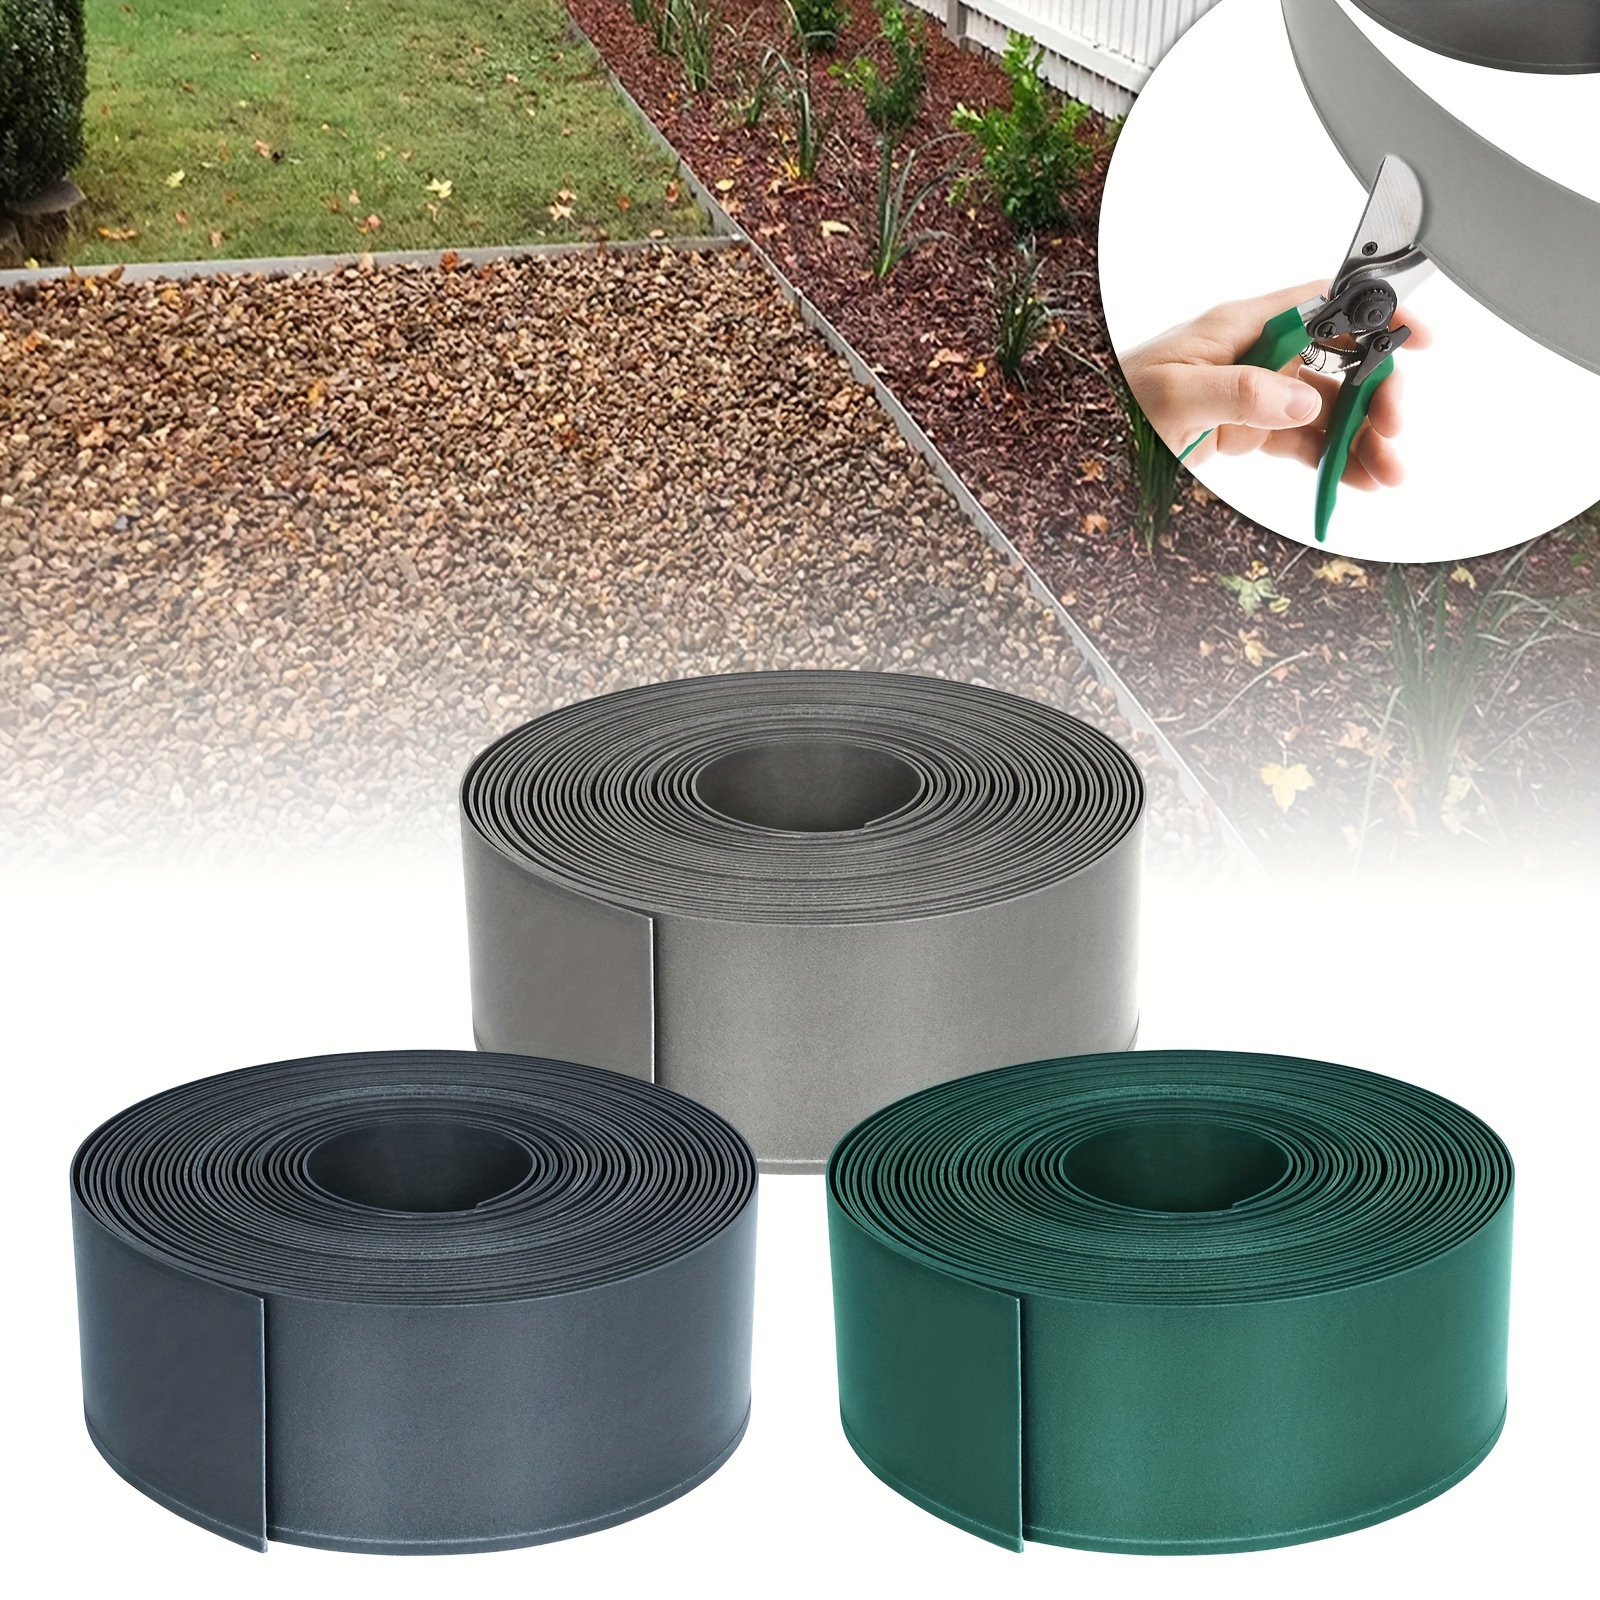 

Subtlety 20m Lawn Edging 12cm Heiht Flower Bed Border Made Of Pp Plastic, Weatherproof Palisades Roll, Bendable Mowing Edge, Grasscrete Barrier For Zoning The Garden Or Building Vegetable Growing Beds